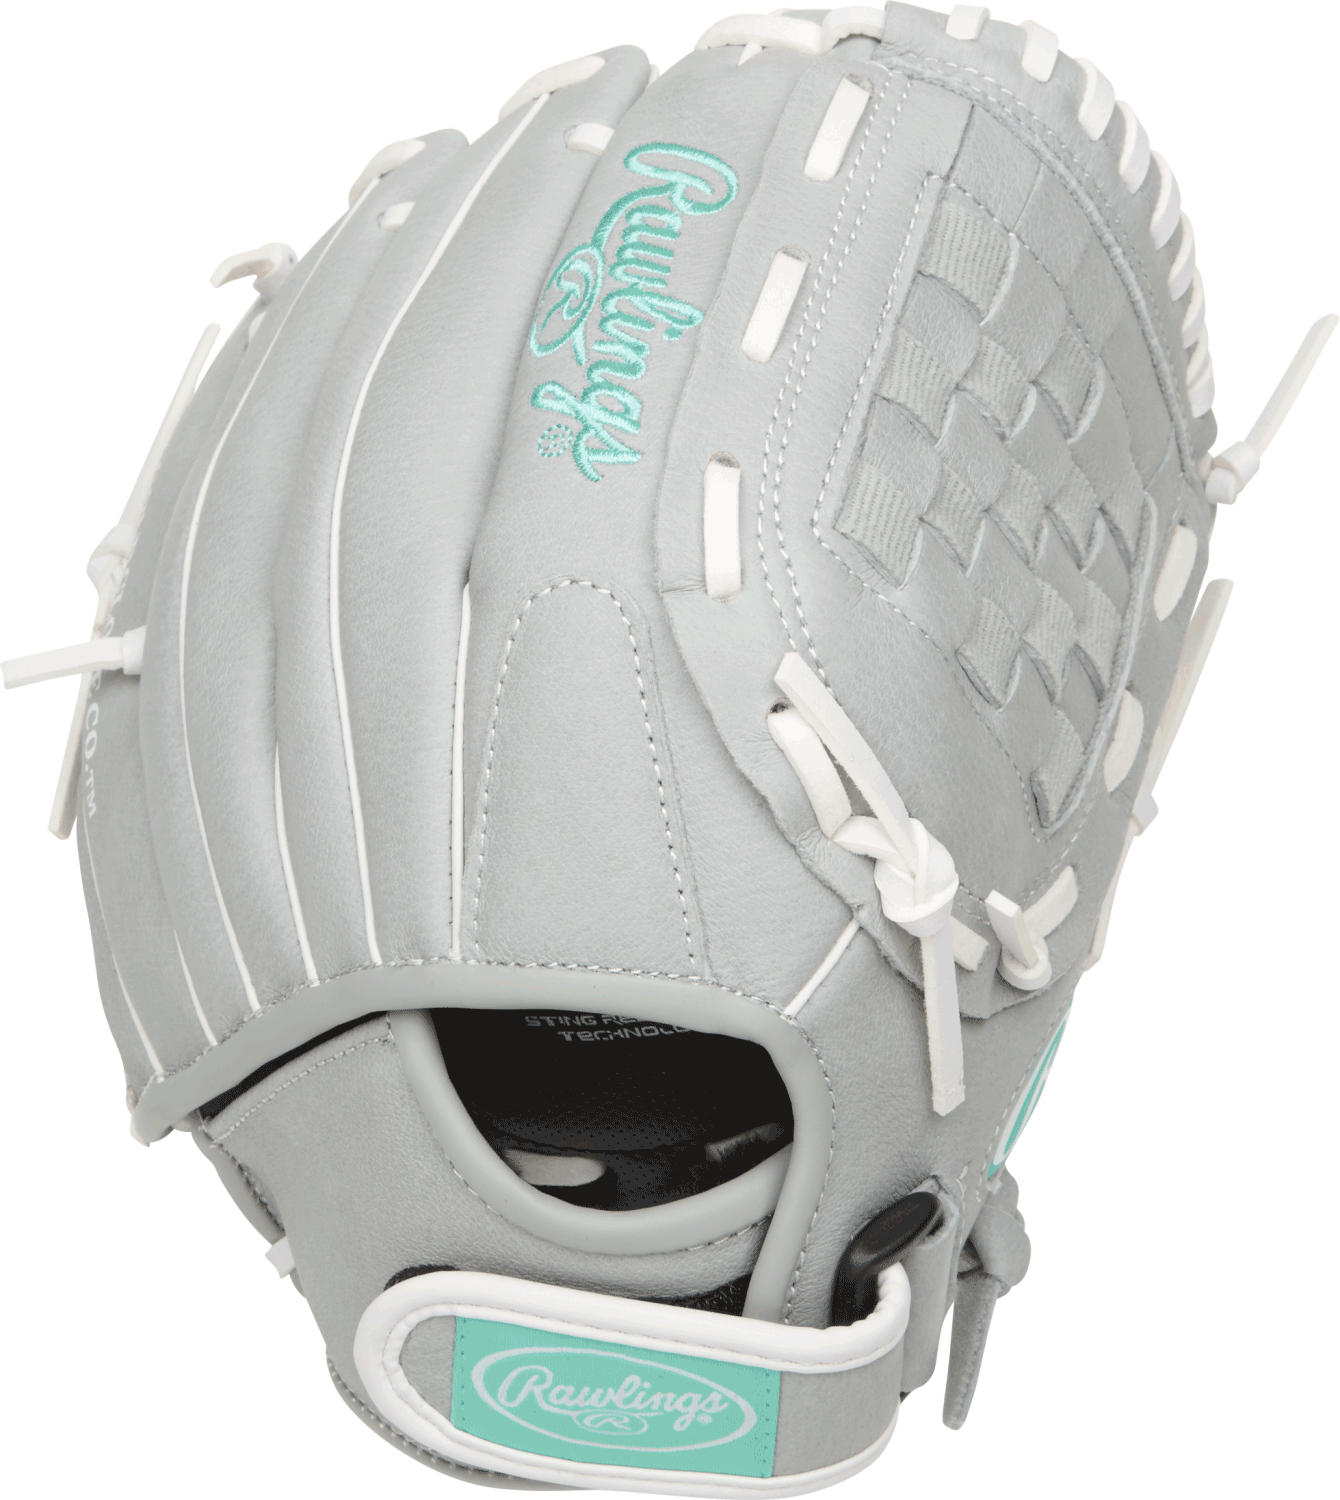 Rawlings Sure Catch Softball SCSB110M 11"